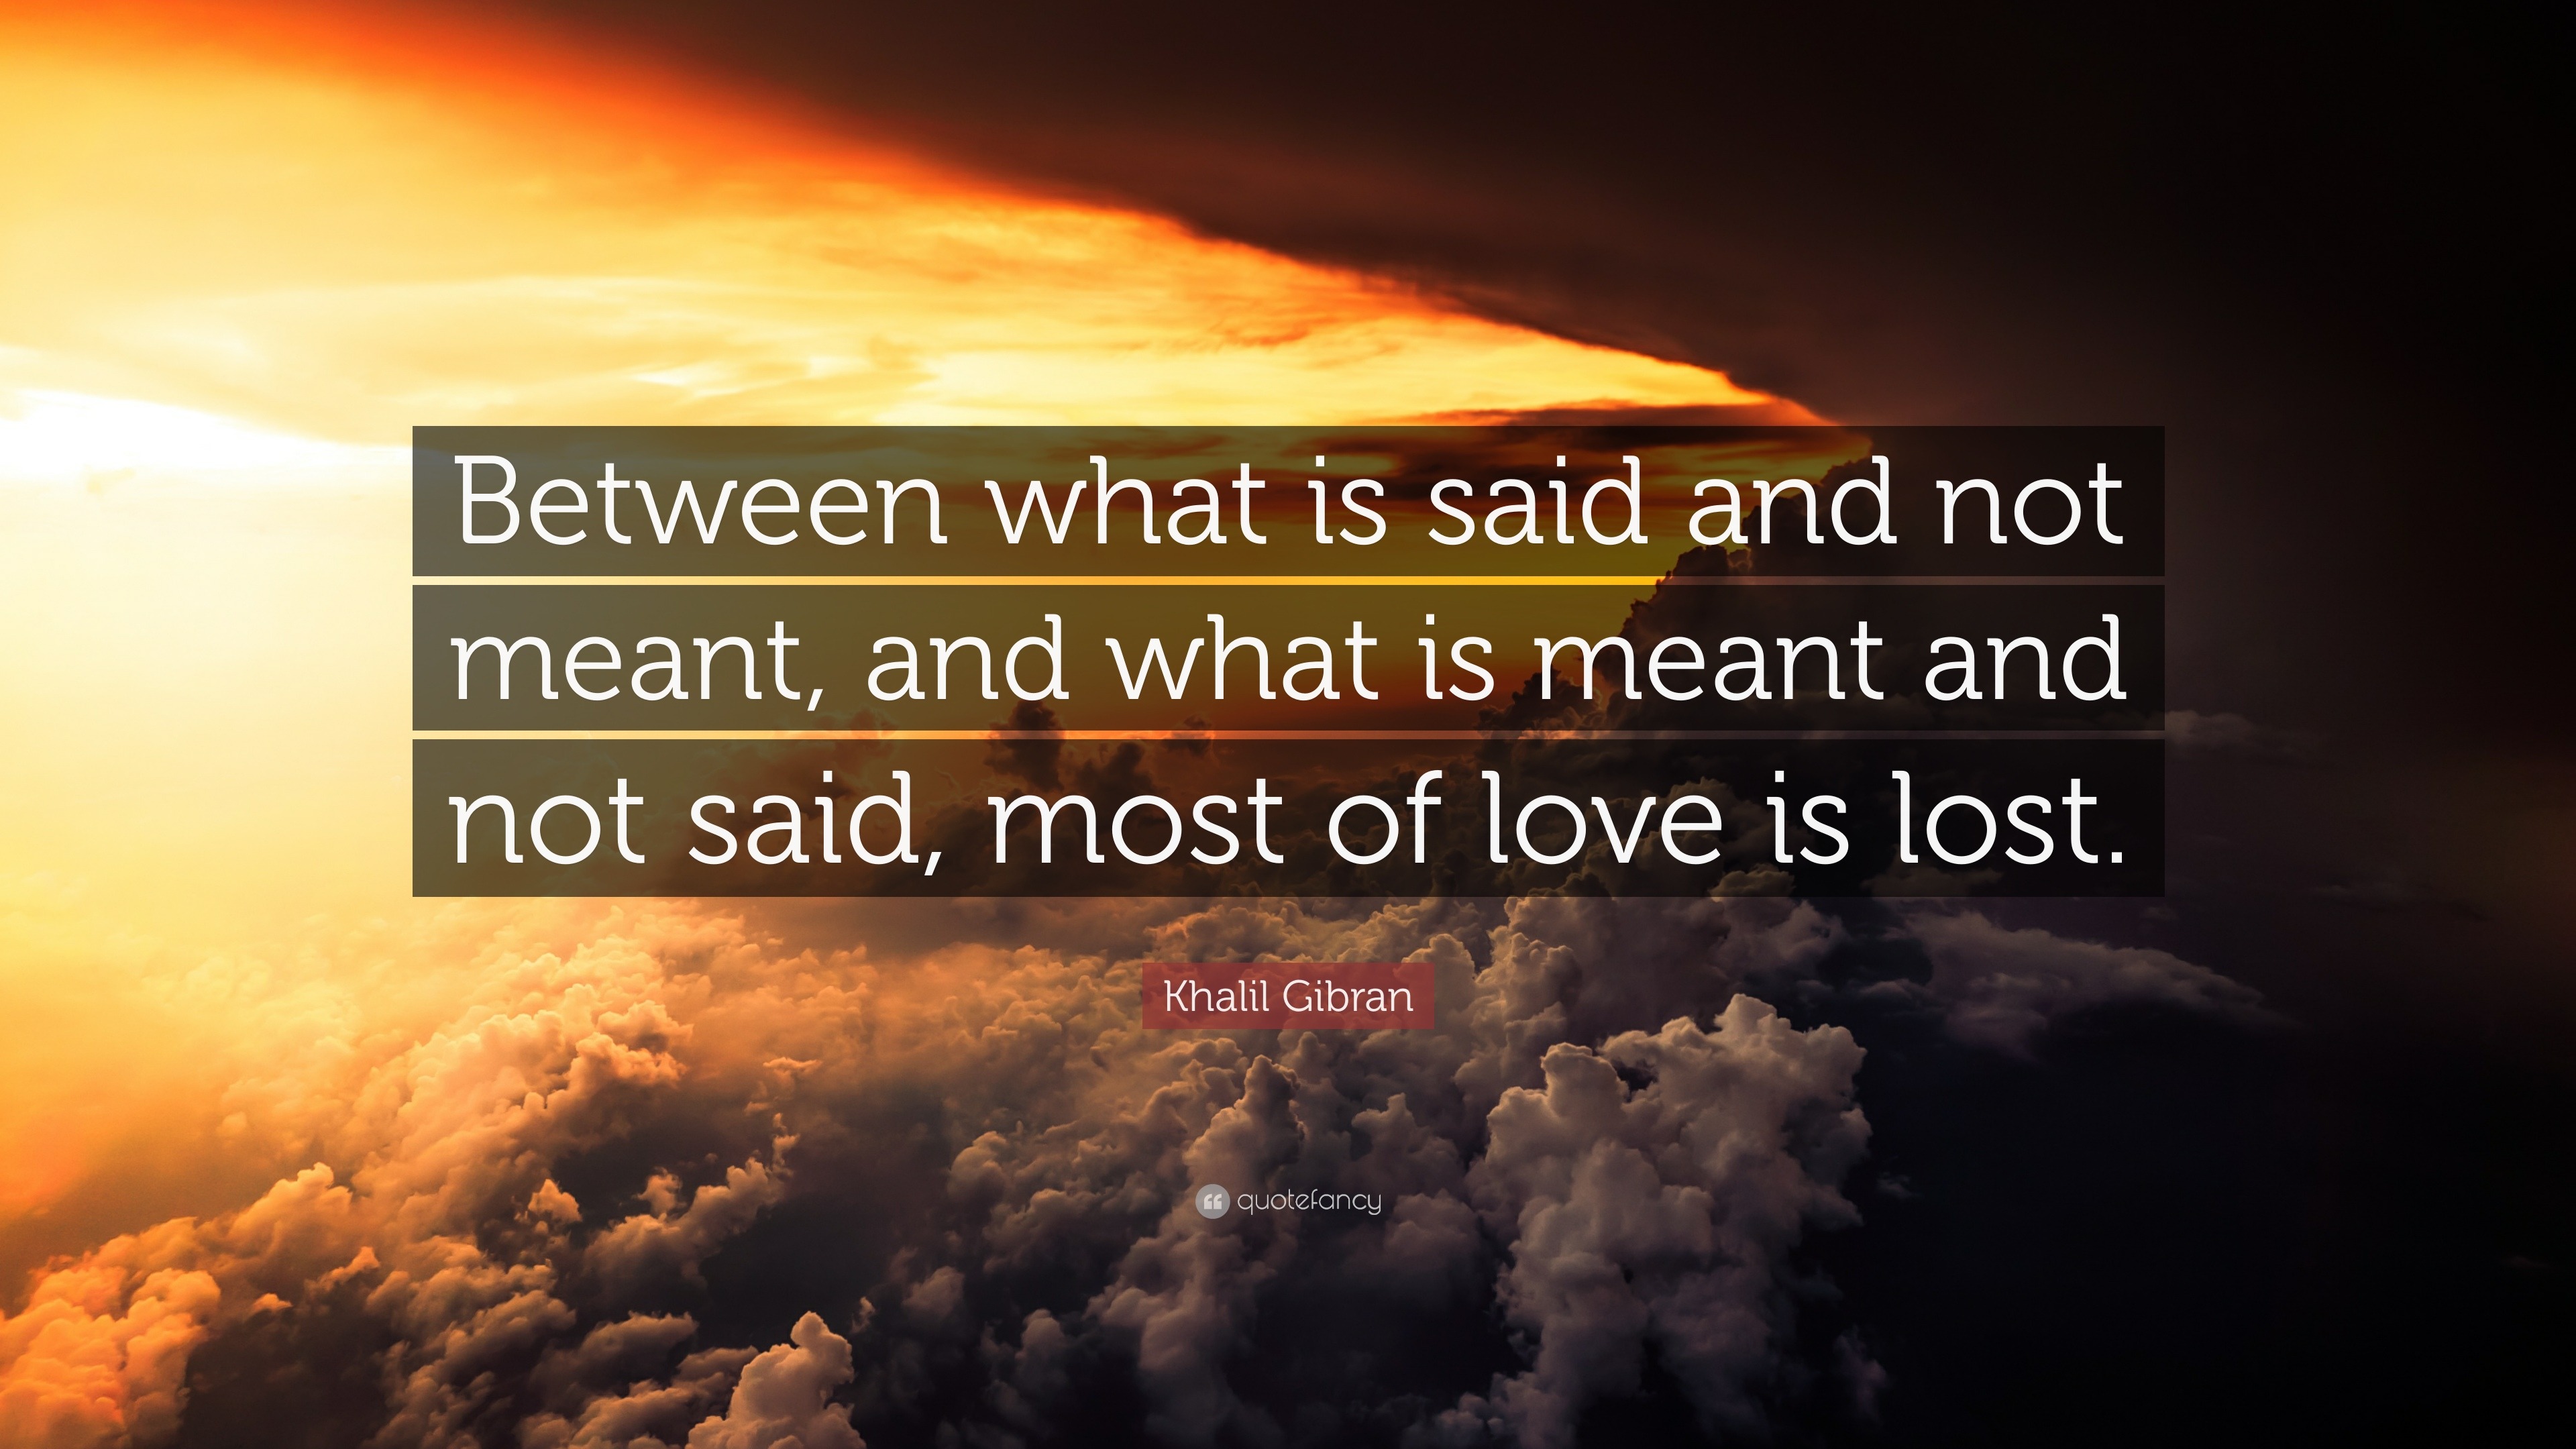 Khalil Gibran Quote: “Between what is said and not meant, and what is